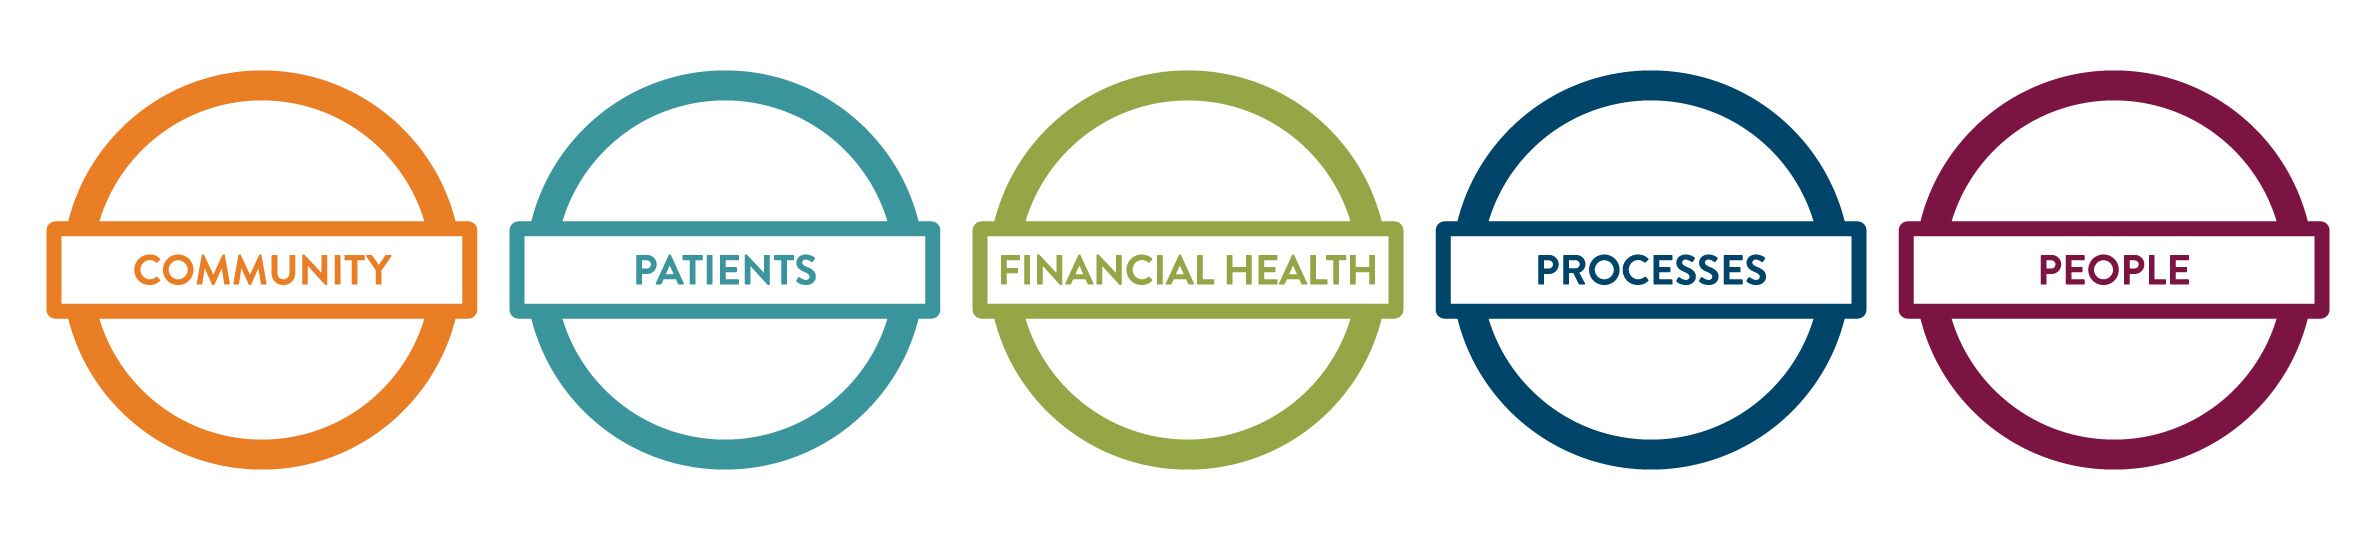 five circles with text in center, each representing a priority topic: community, patients, financial health, processes, people